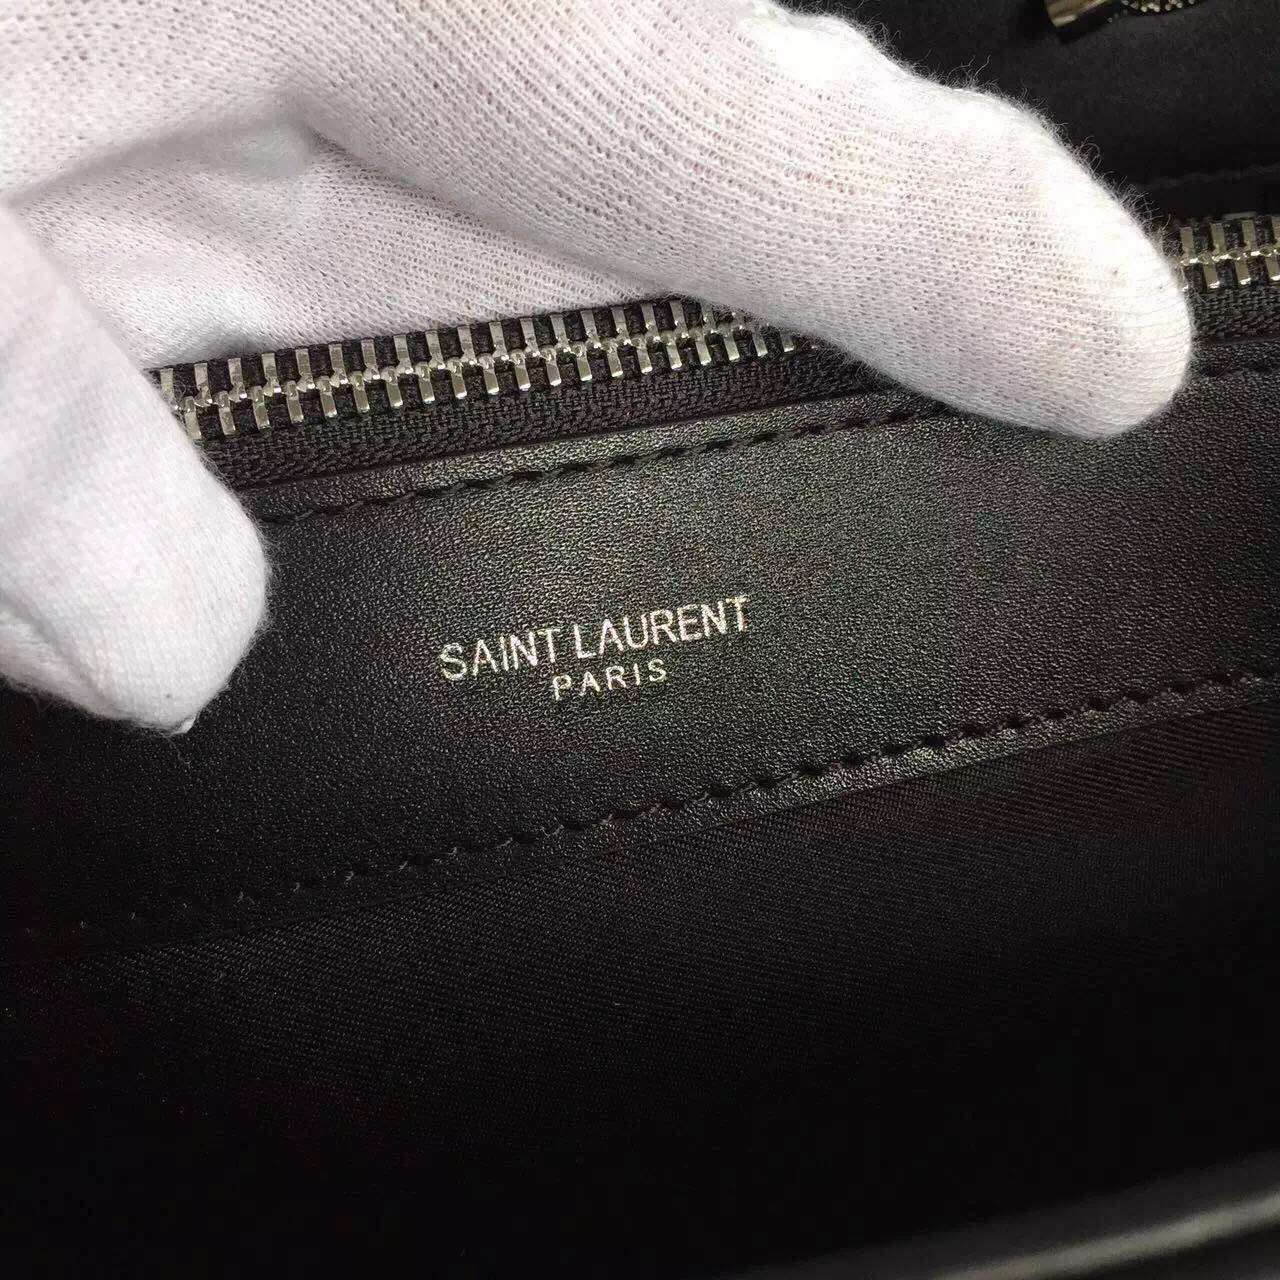 2015 New Saint Laurent Bag Cheap Sale-Saint Laurent Classic Monogram Shopping Bag in Black Smooth Calfskin Leather with Silver Chain - Click Image to Close